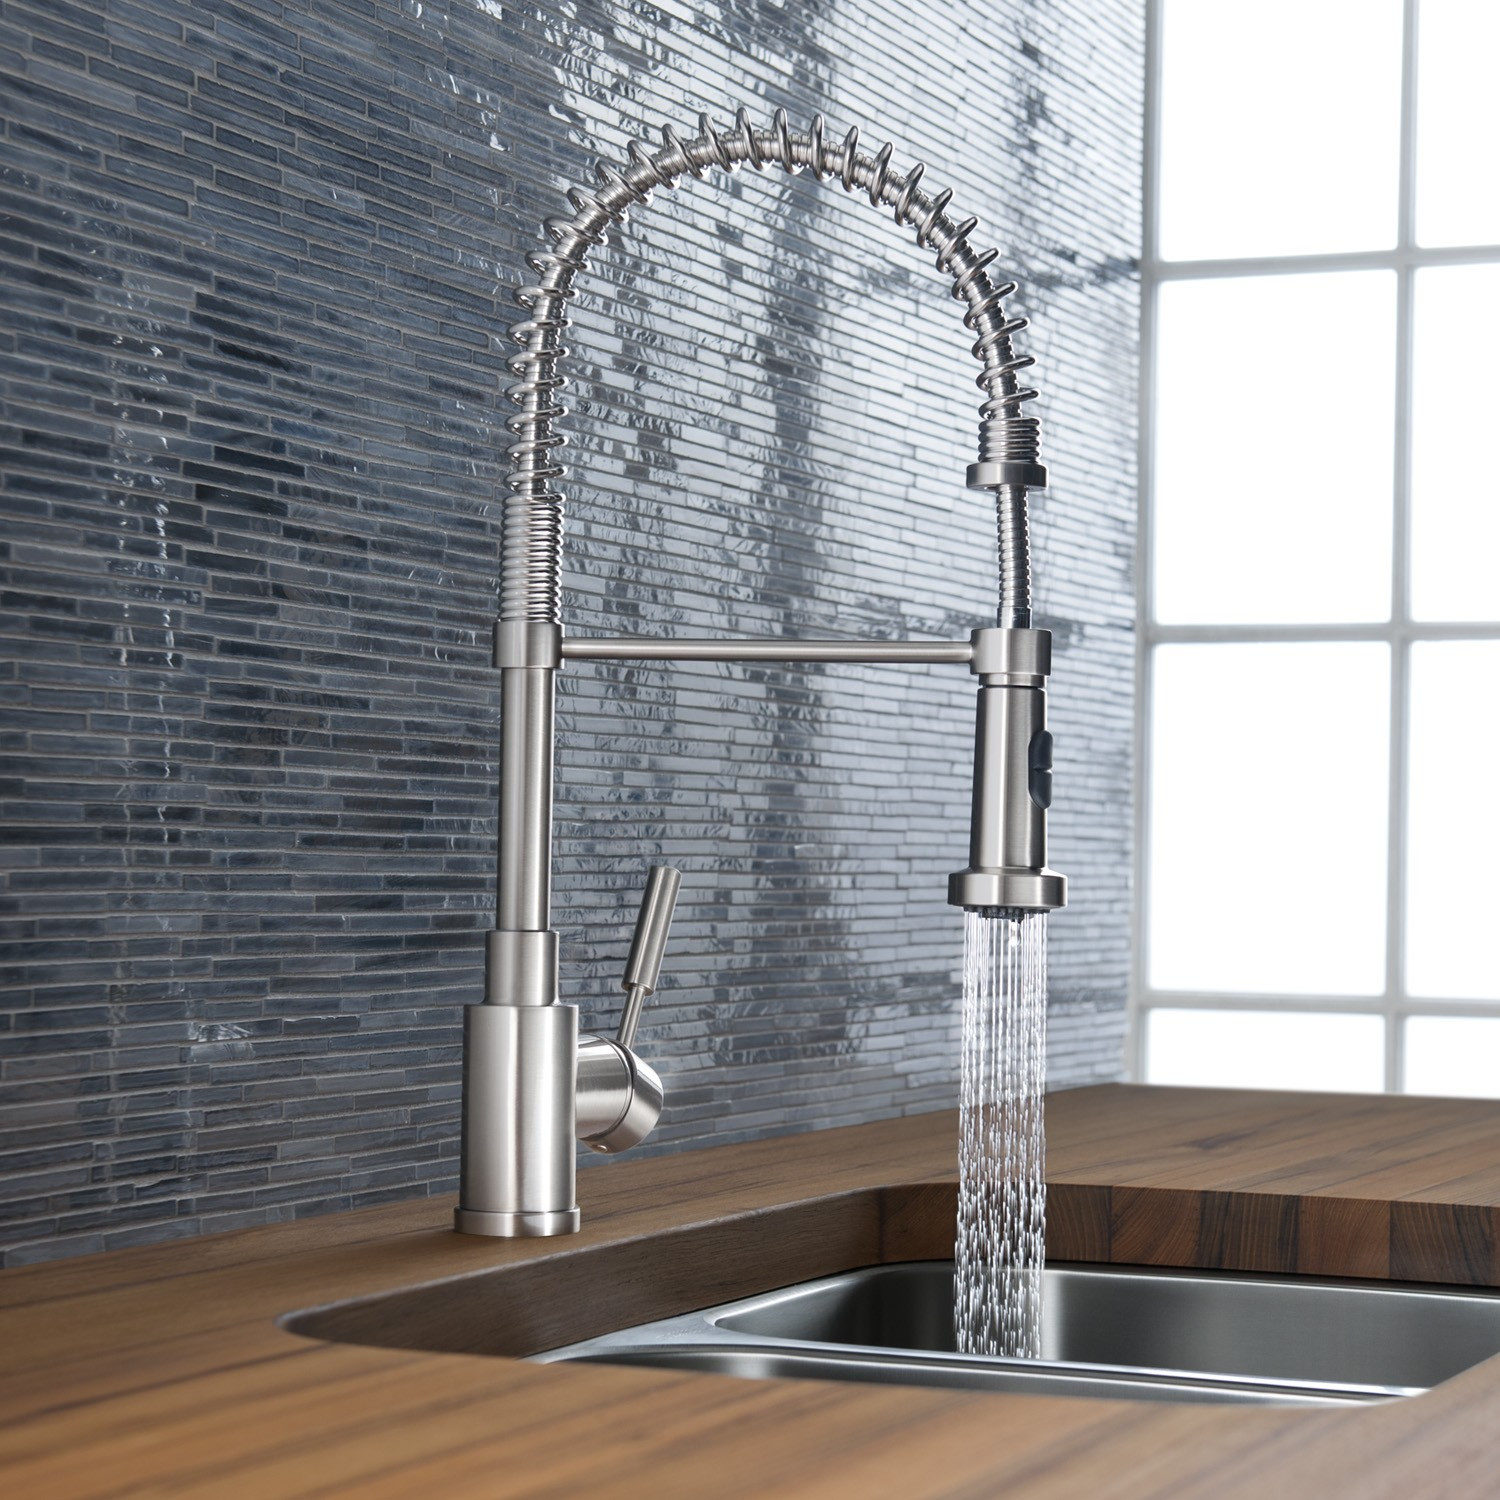 Modern Kitchen Faucets
 How to Choose A Kitchen Faucet